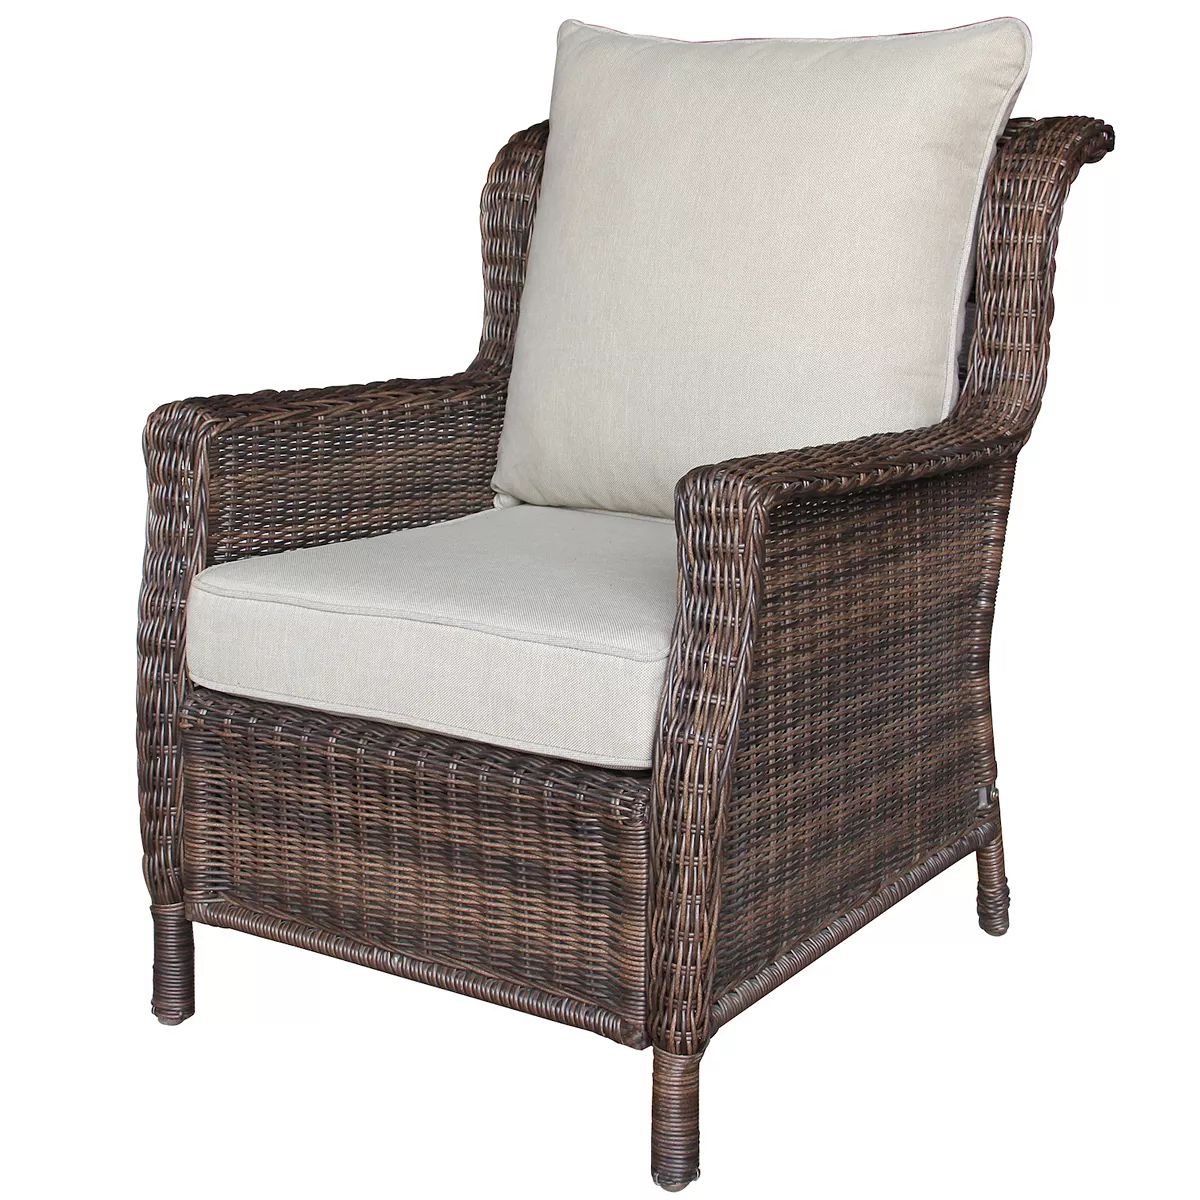 Sonoma Goods For Life® Cortena Wicker Lounge Arm Chair | Kohl's